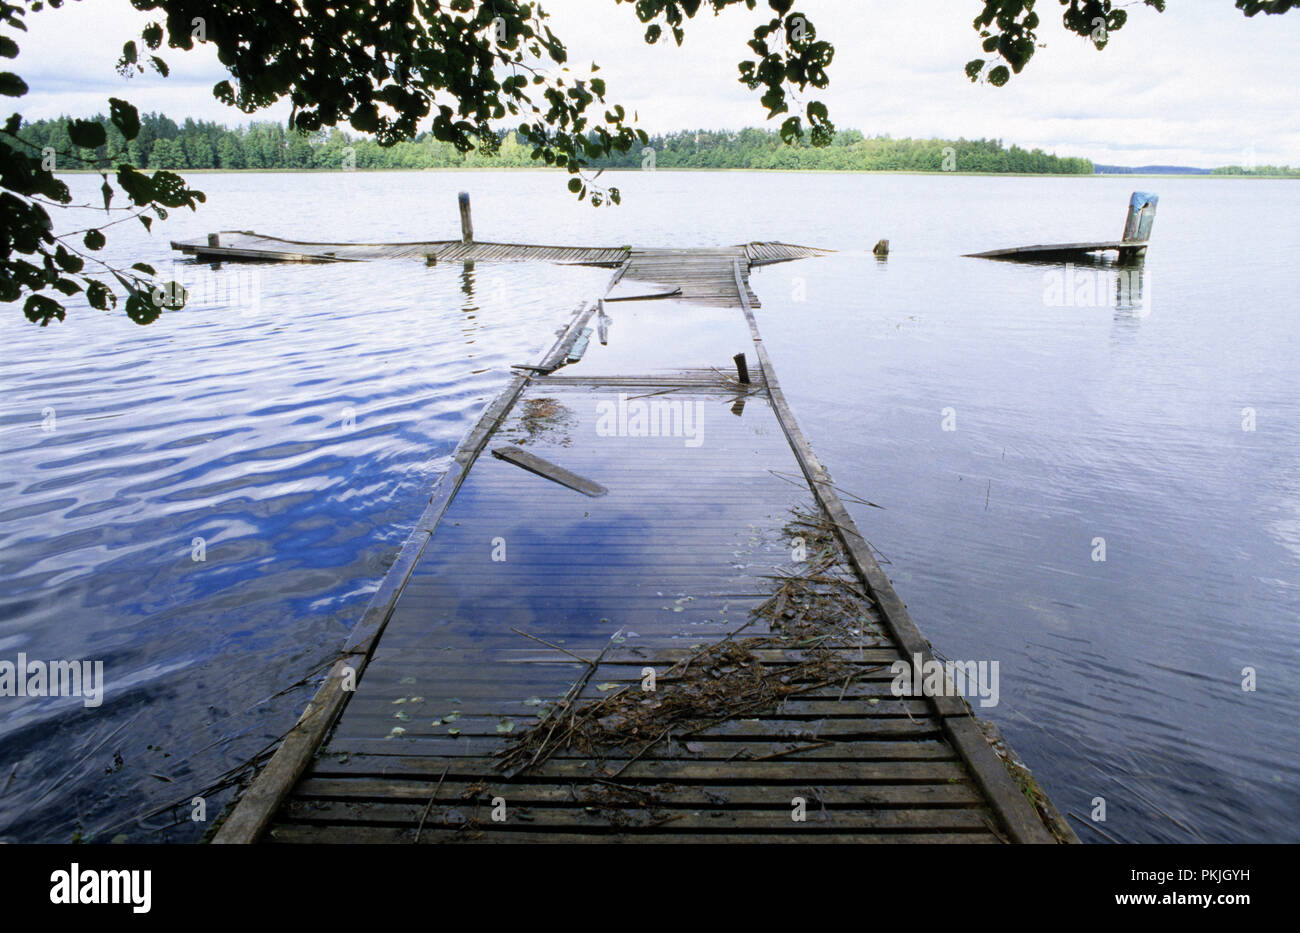 Dilapidated wooden jetty on Lake Wigry in the Suwalszczyzna region of Poland August 2007 Stock Photo